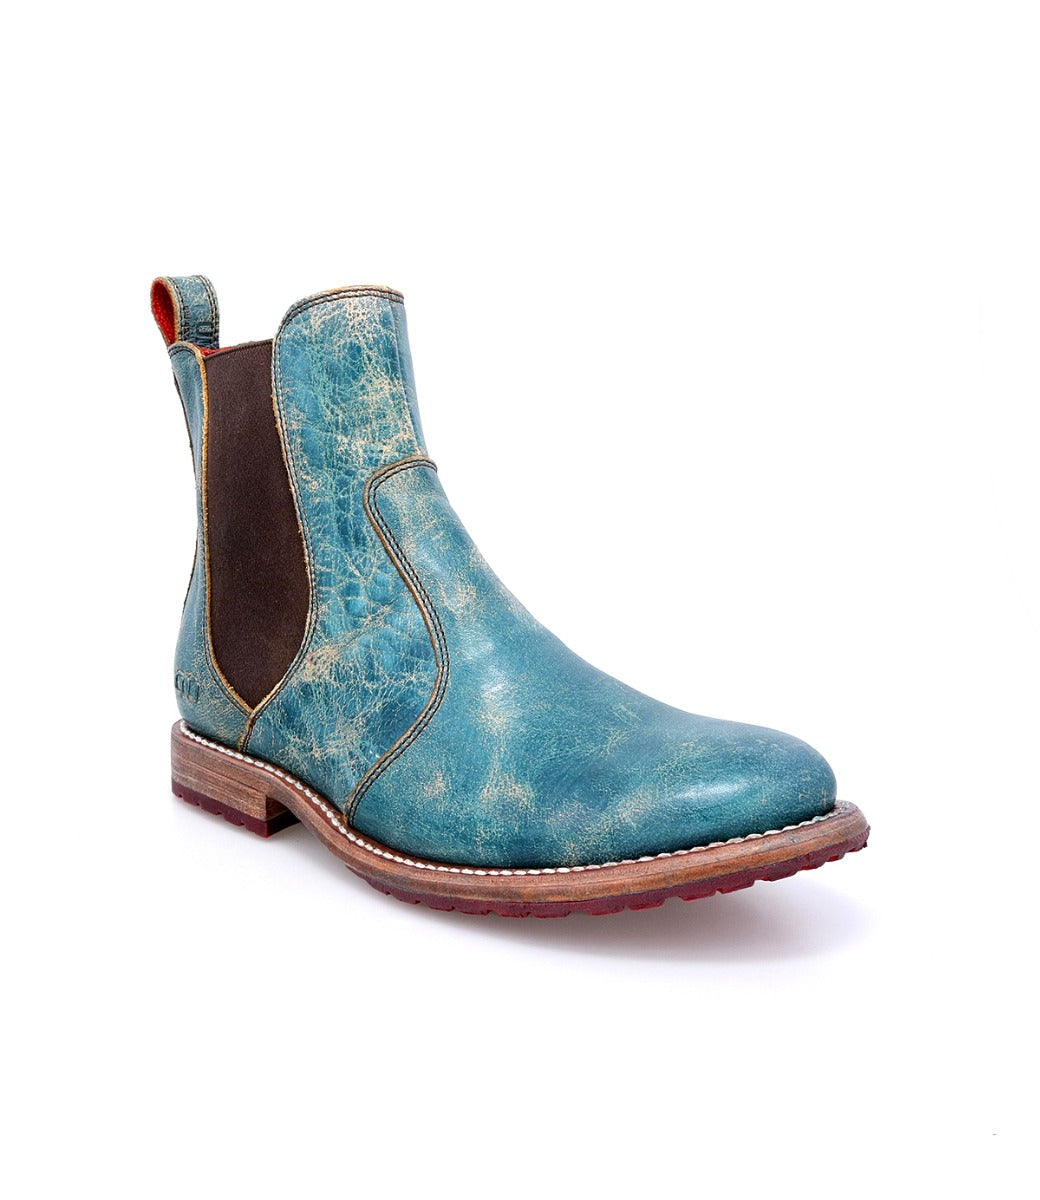 A Nandi teal vegetable tanned leather chelsea boot by Bed Stu.